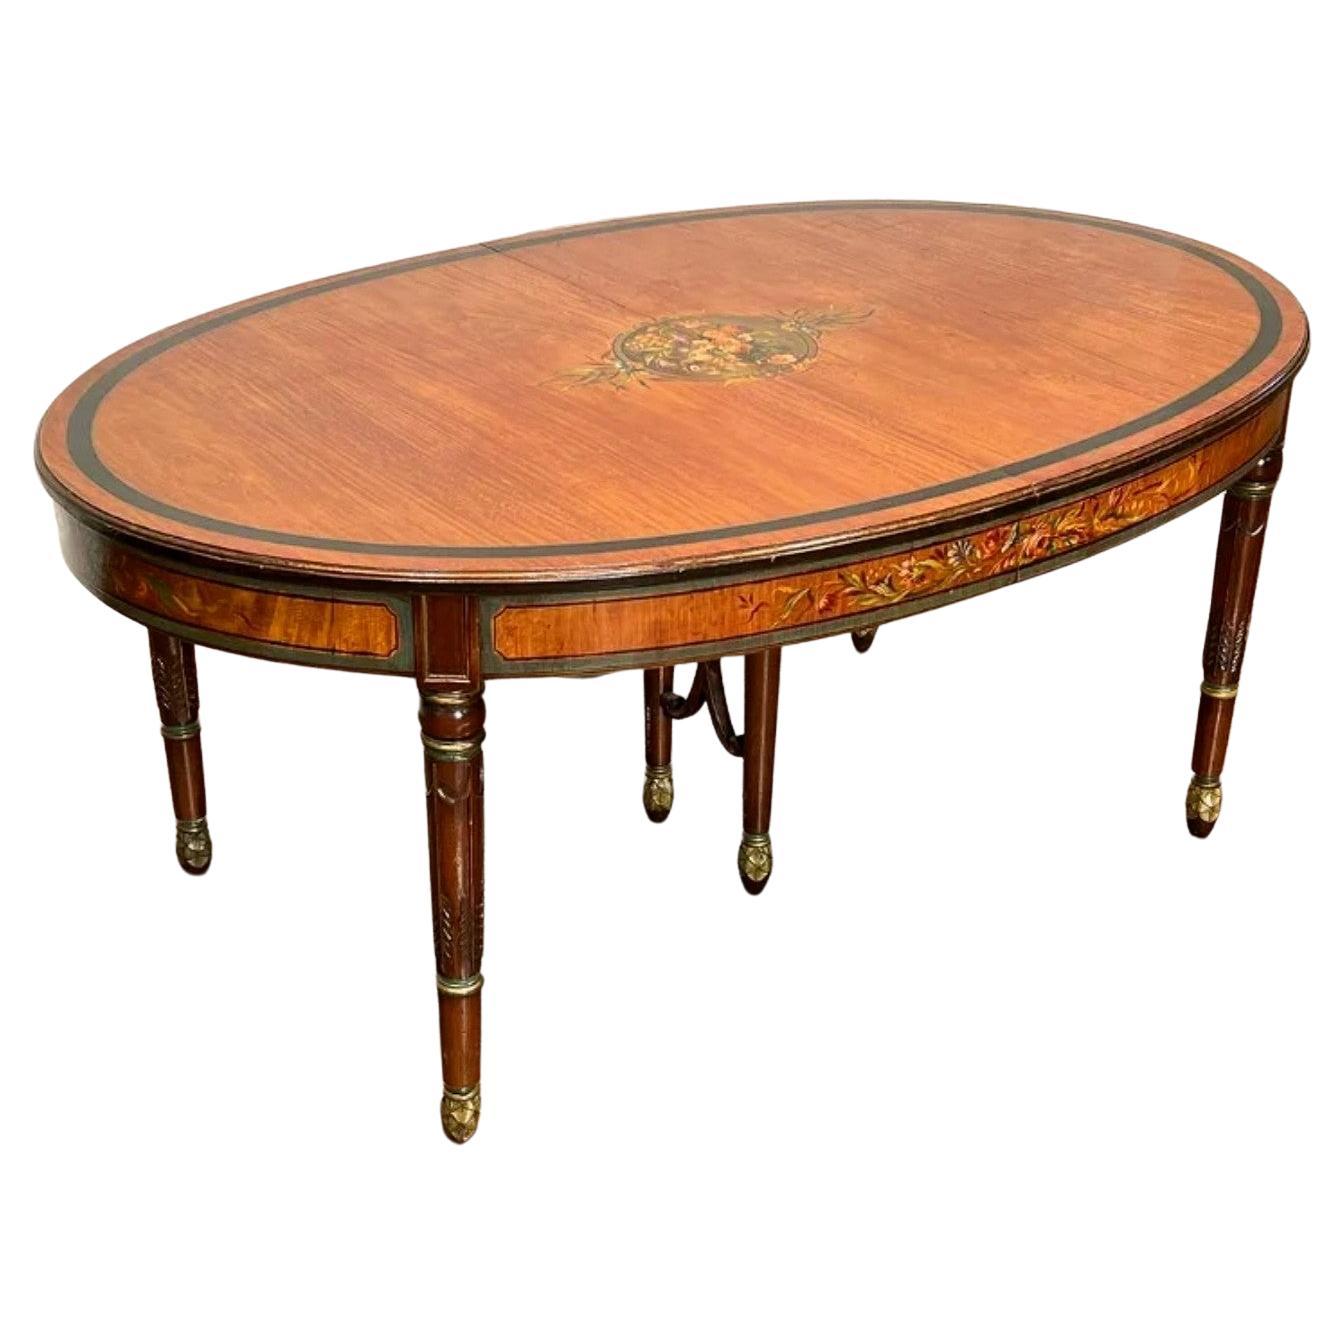 English Edwardian Period Adam Style Cocktail Table